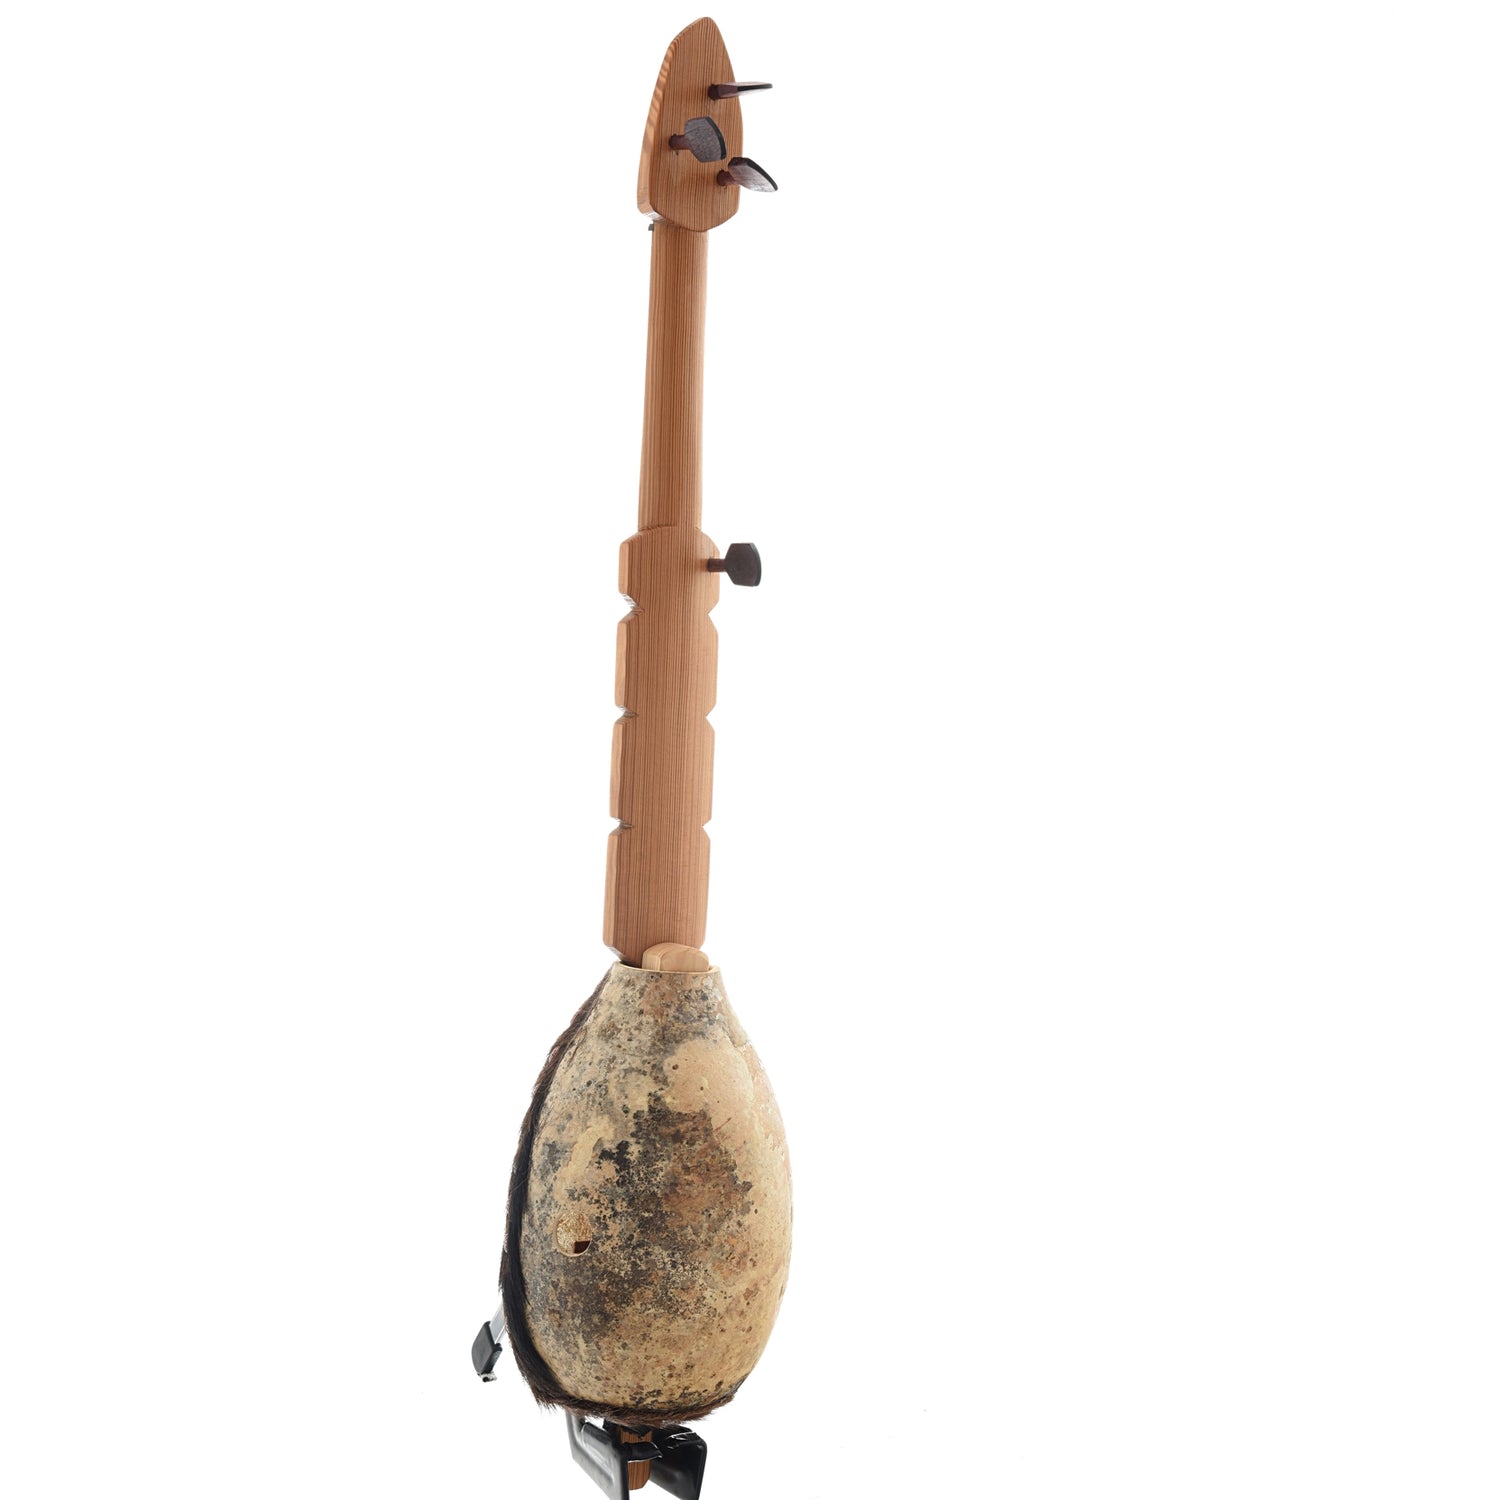 Image 10 of Menzies Gourd Banza - SKU# MBANZ8-1 : Product Type Other Banjos : Elderly Instruments